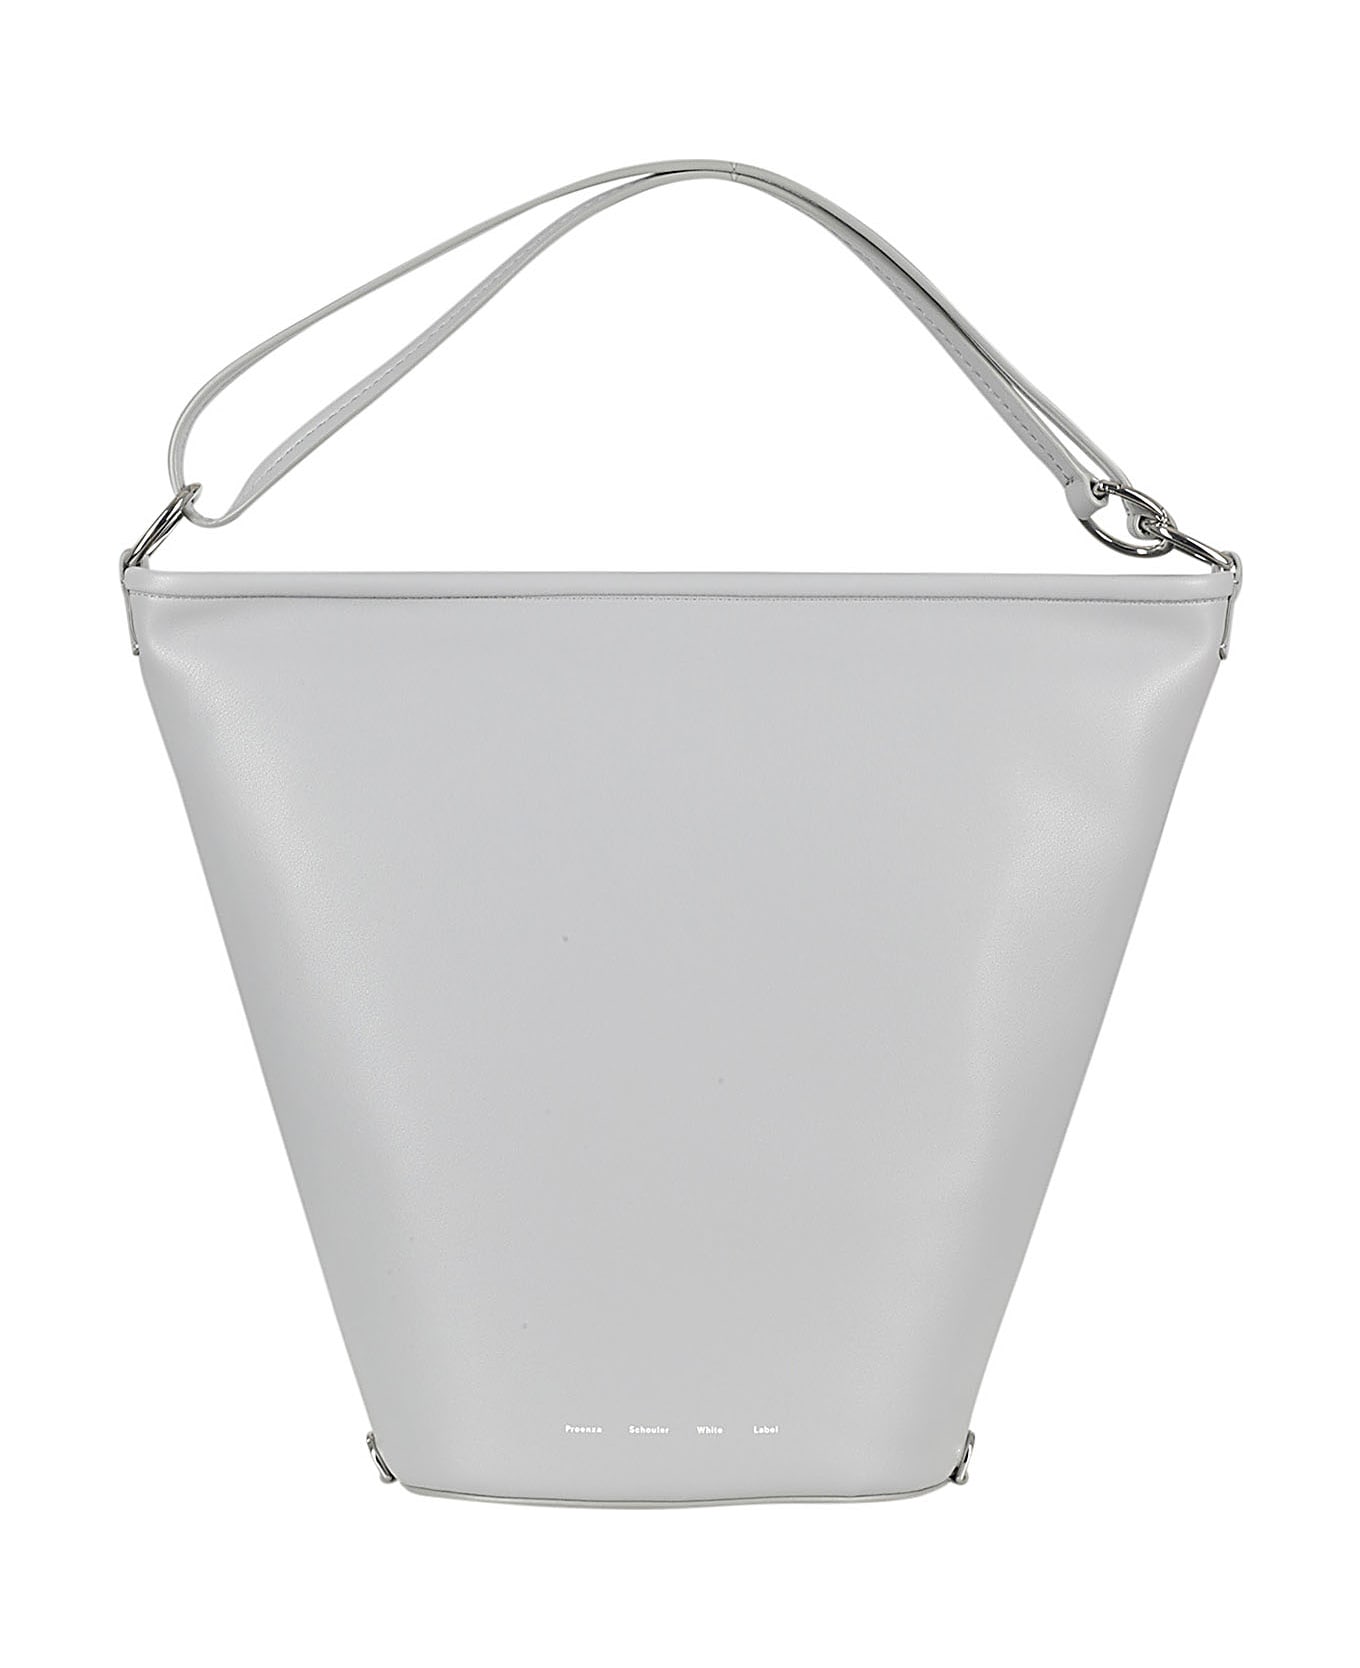 Proenza Schouler White Label Leather Spring Bucket Bag トートバッグ